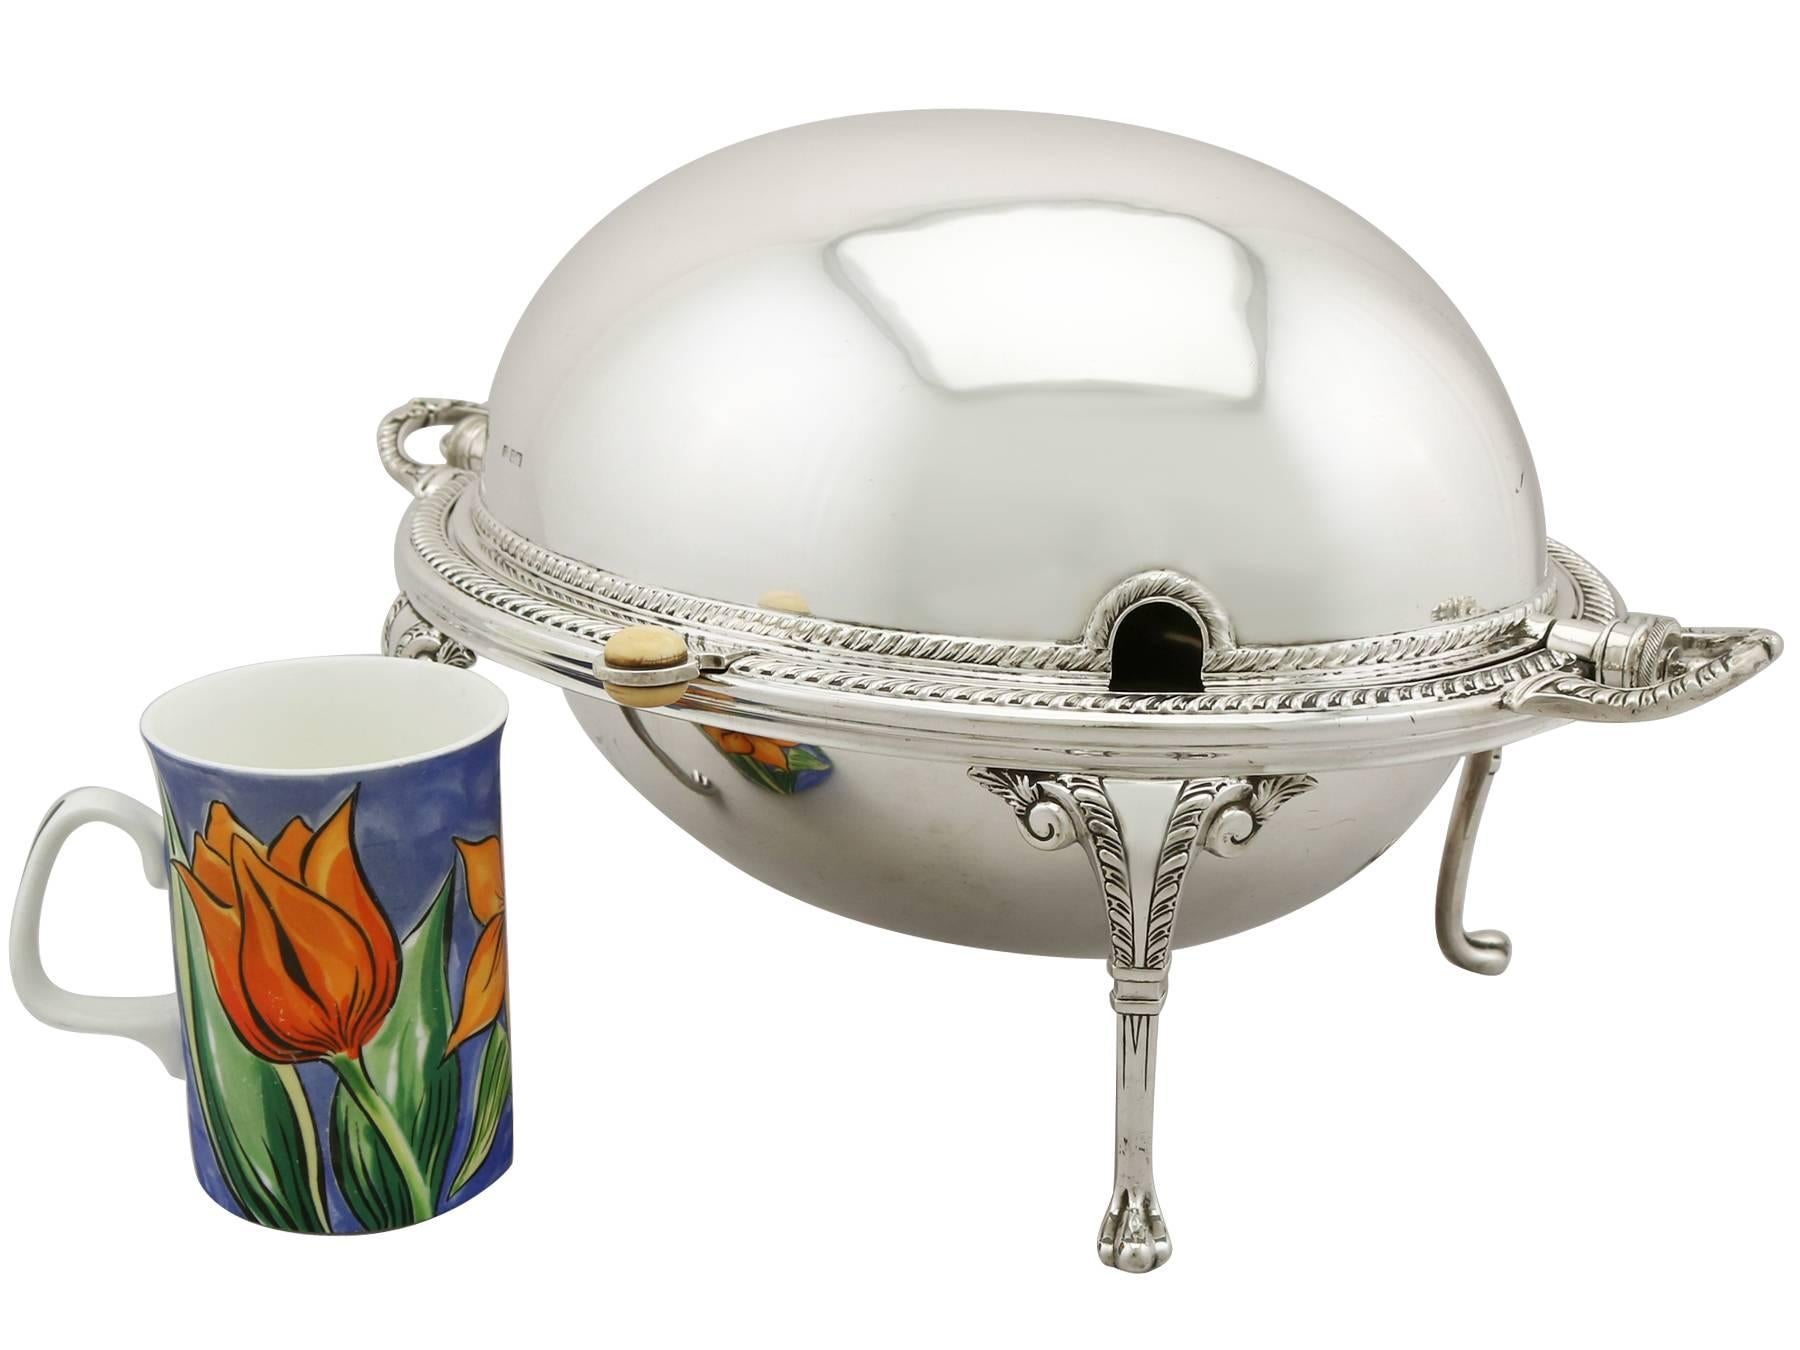 An exceptional, fine and impressive antique Edwardian sterling silver revolving breakfast dish; an addition to our silverware collection.

This exceptional antique Edwardian sterling silver breakfast dish has an oval domed shaped form.

The